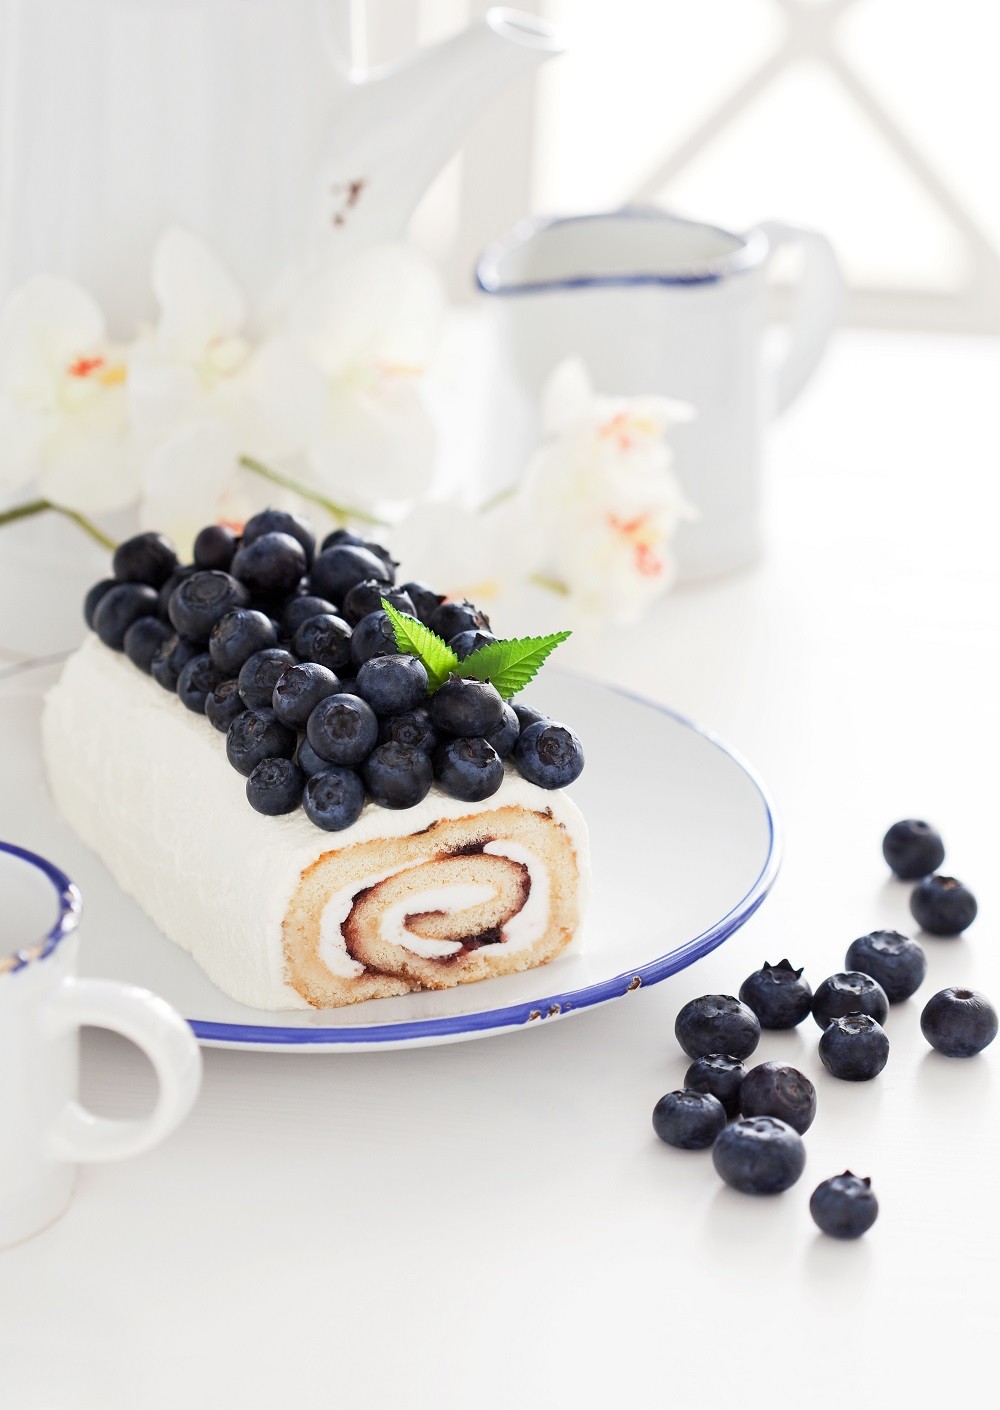 Cake roll with blueberry and cream cheese